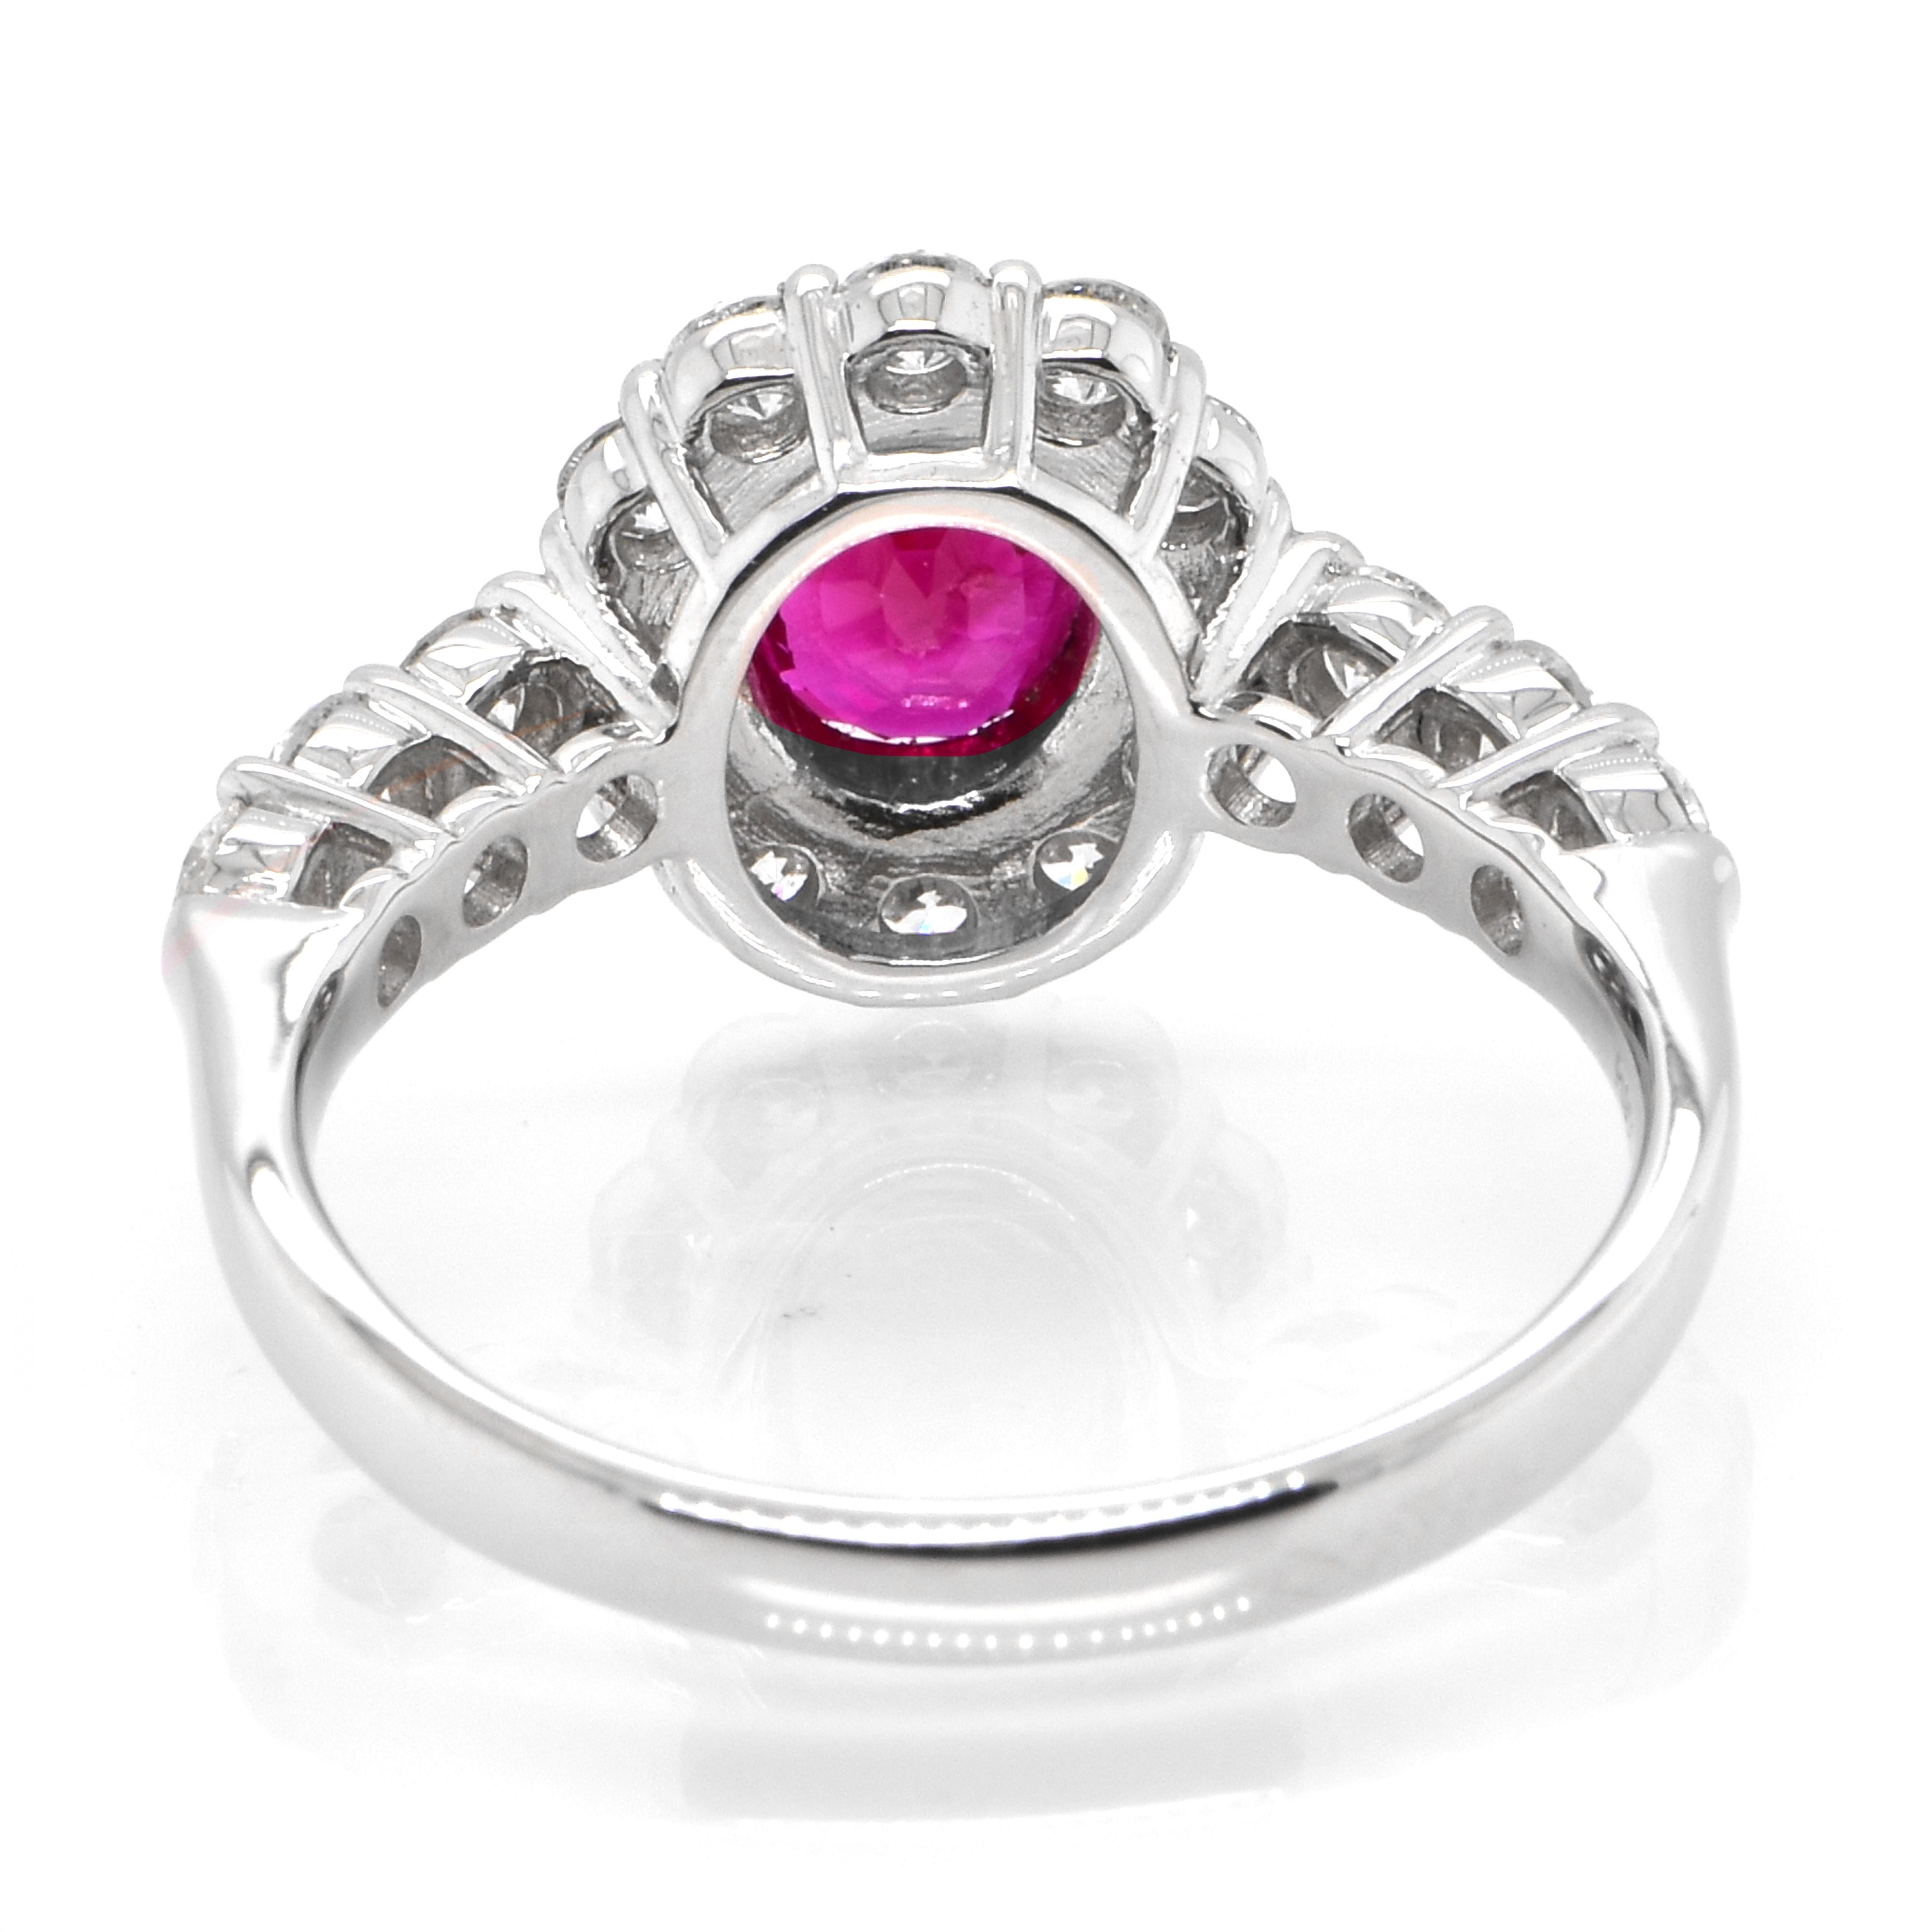 Women's GIA Certified 1.02 Carat Burmese Origin Ruby and Diamond Ring Made in Platinum For Sale